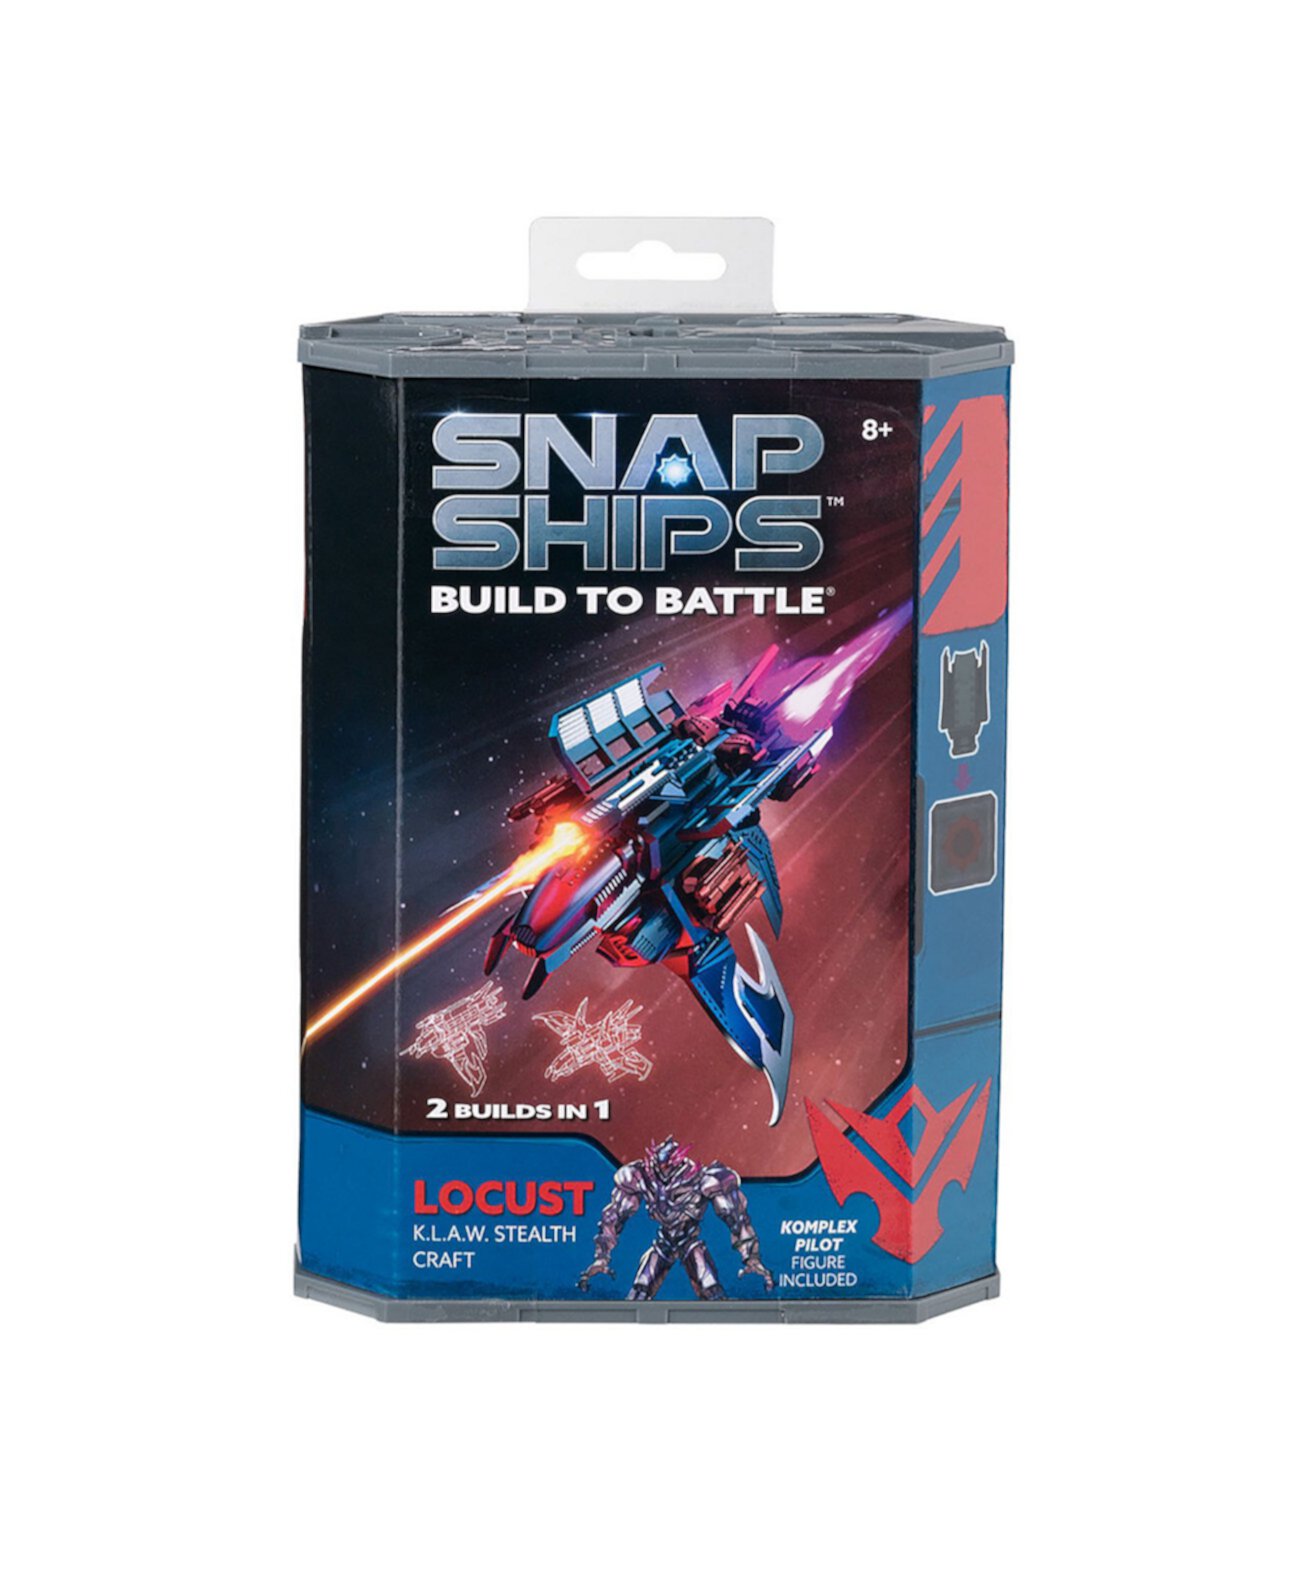 Snap Ships Locust Klaw Stealth Build to Battle, 37 штук PLAYMONSTER